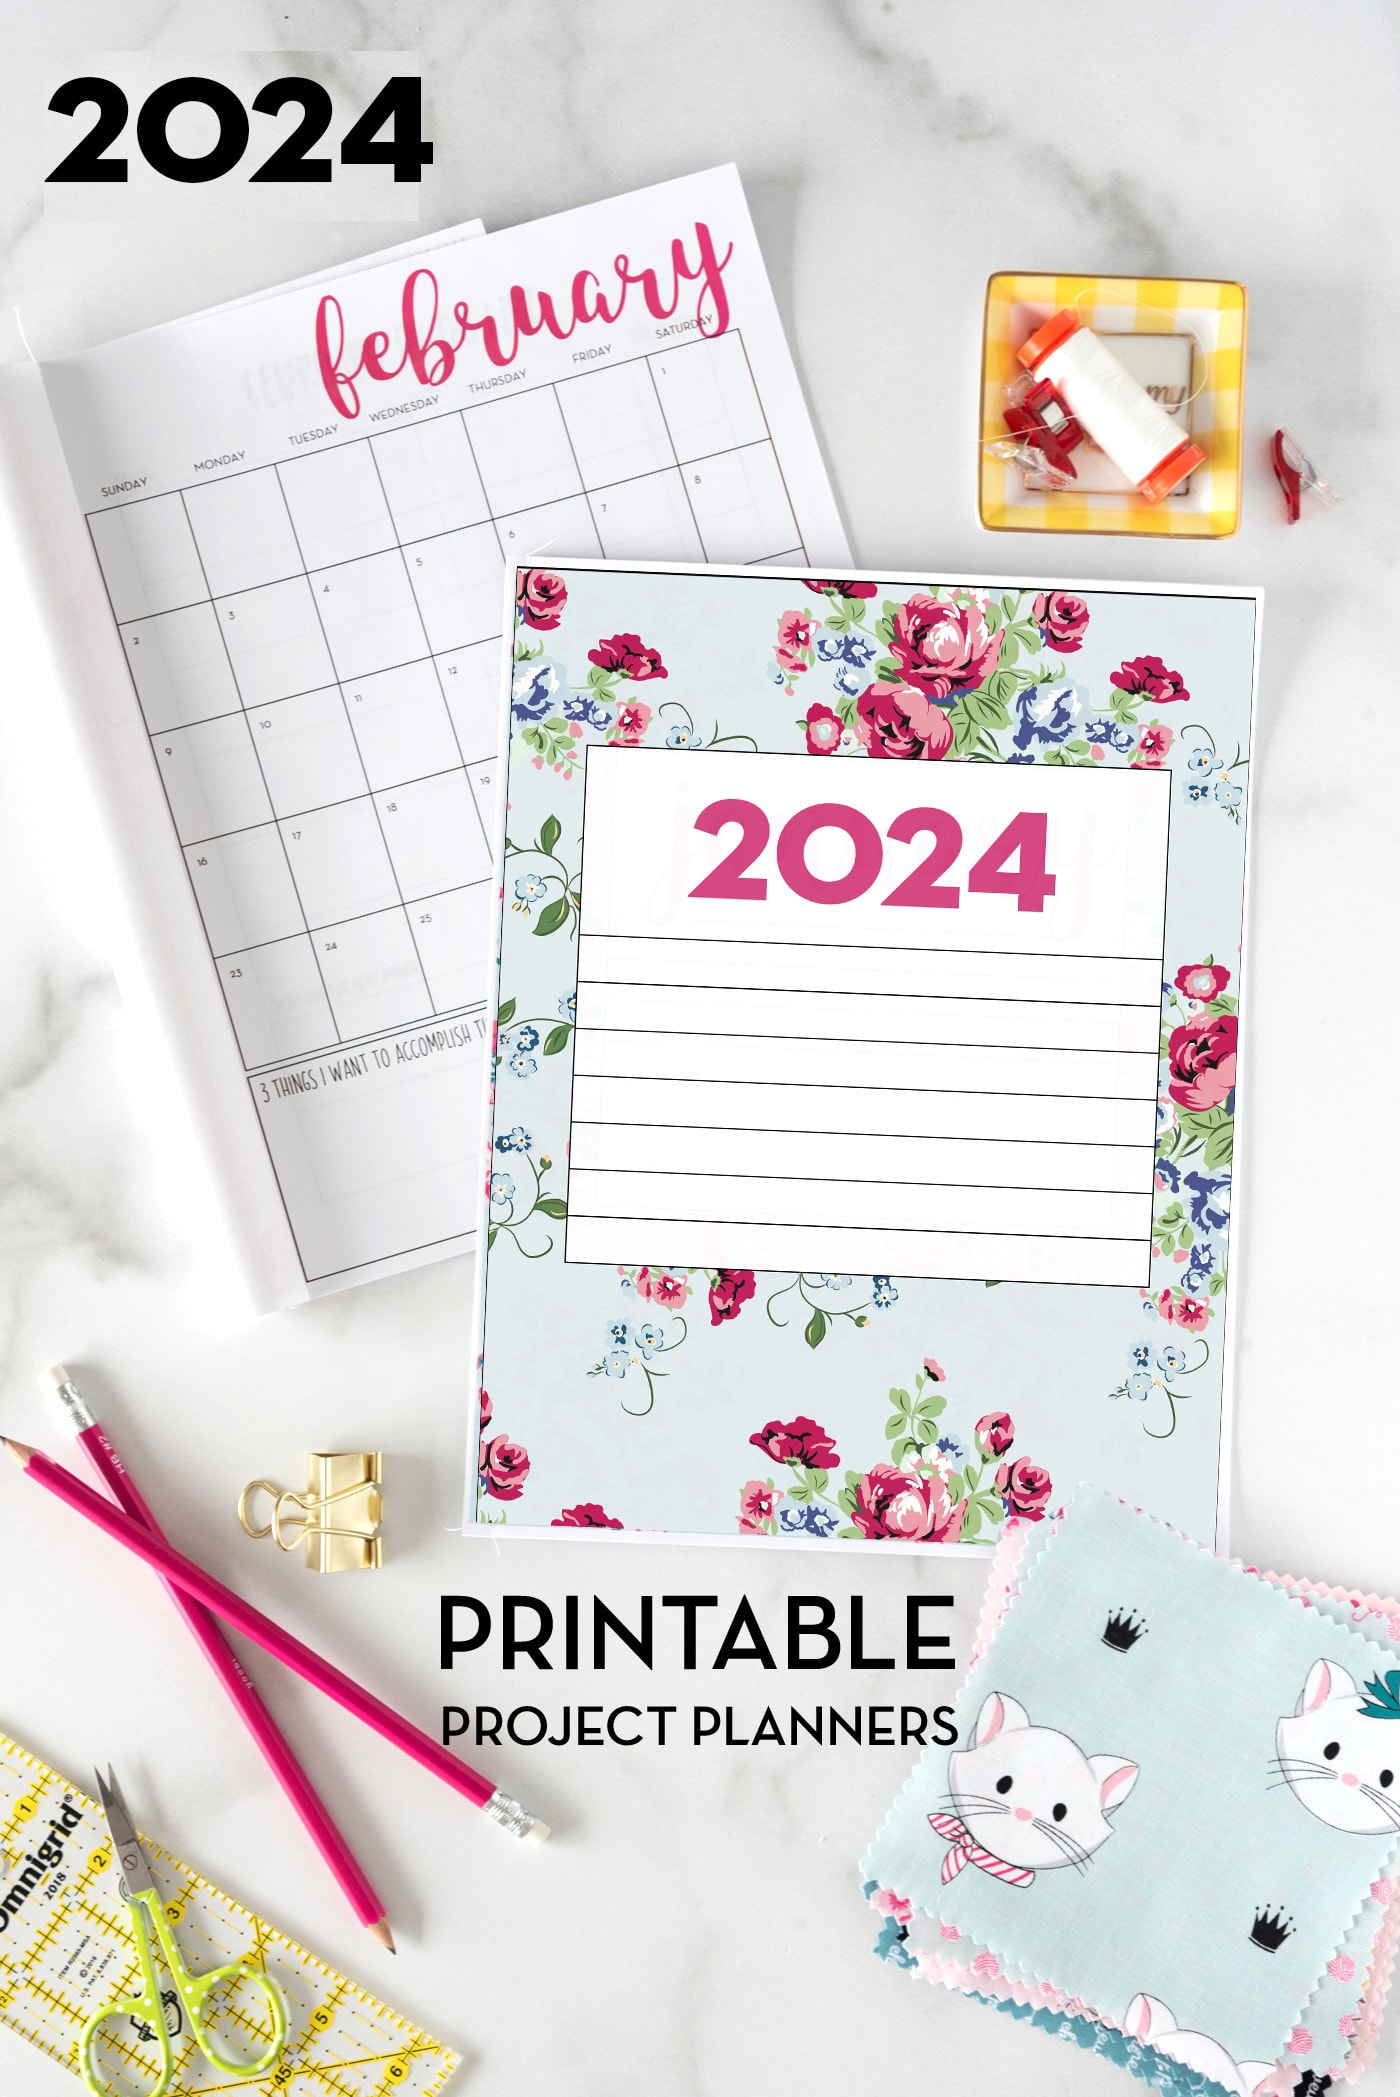 https://www.polkadotchair.com/wp-content/uploads/2024/01/2024-printable-project-planners.jpg